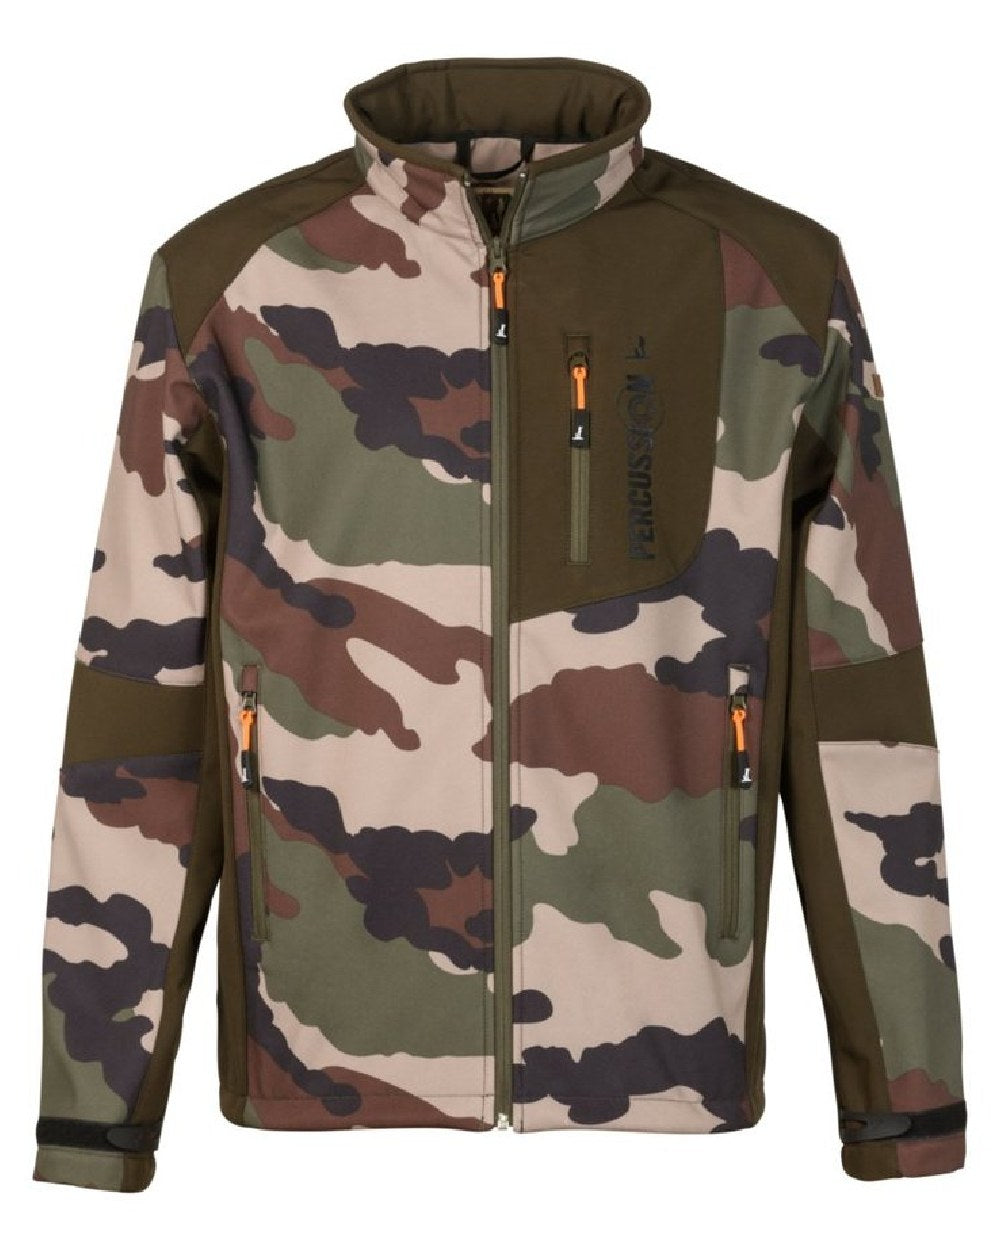 Percussion Softshell Camo Jacket in Centre Europe 